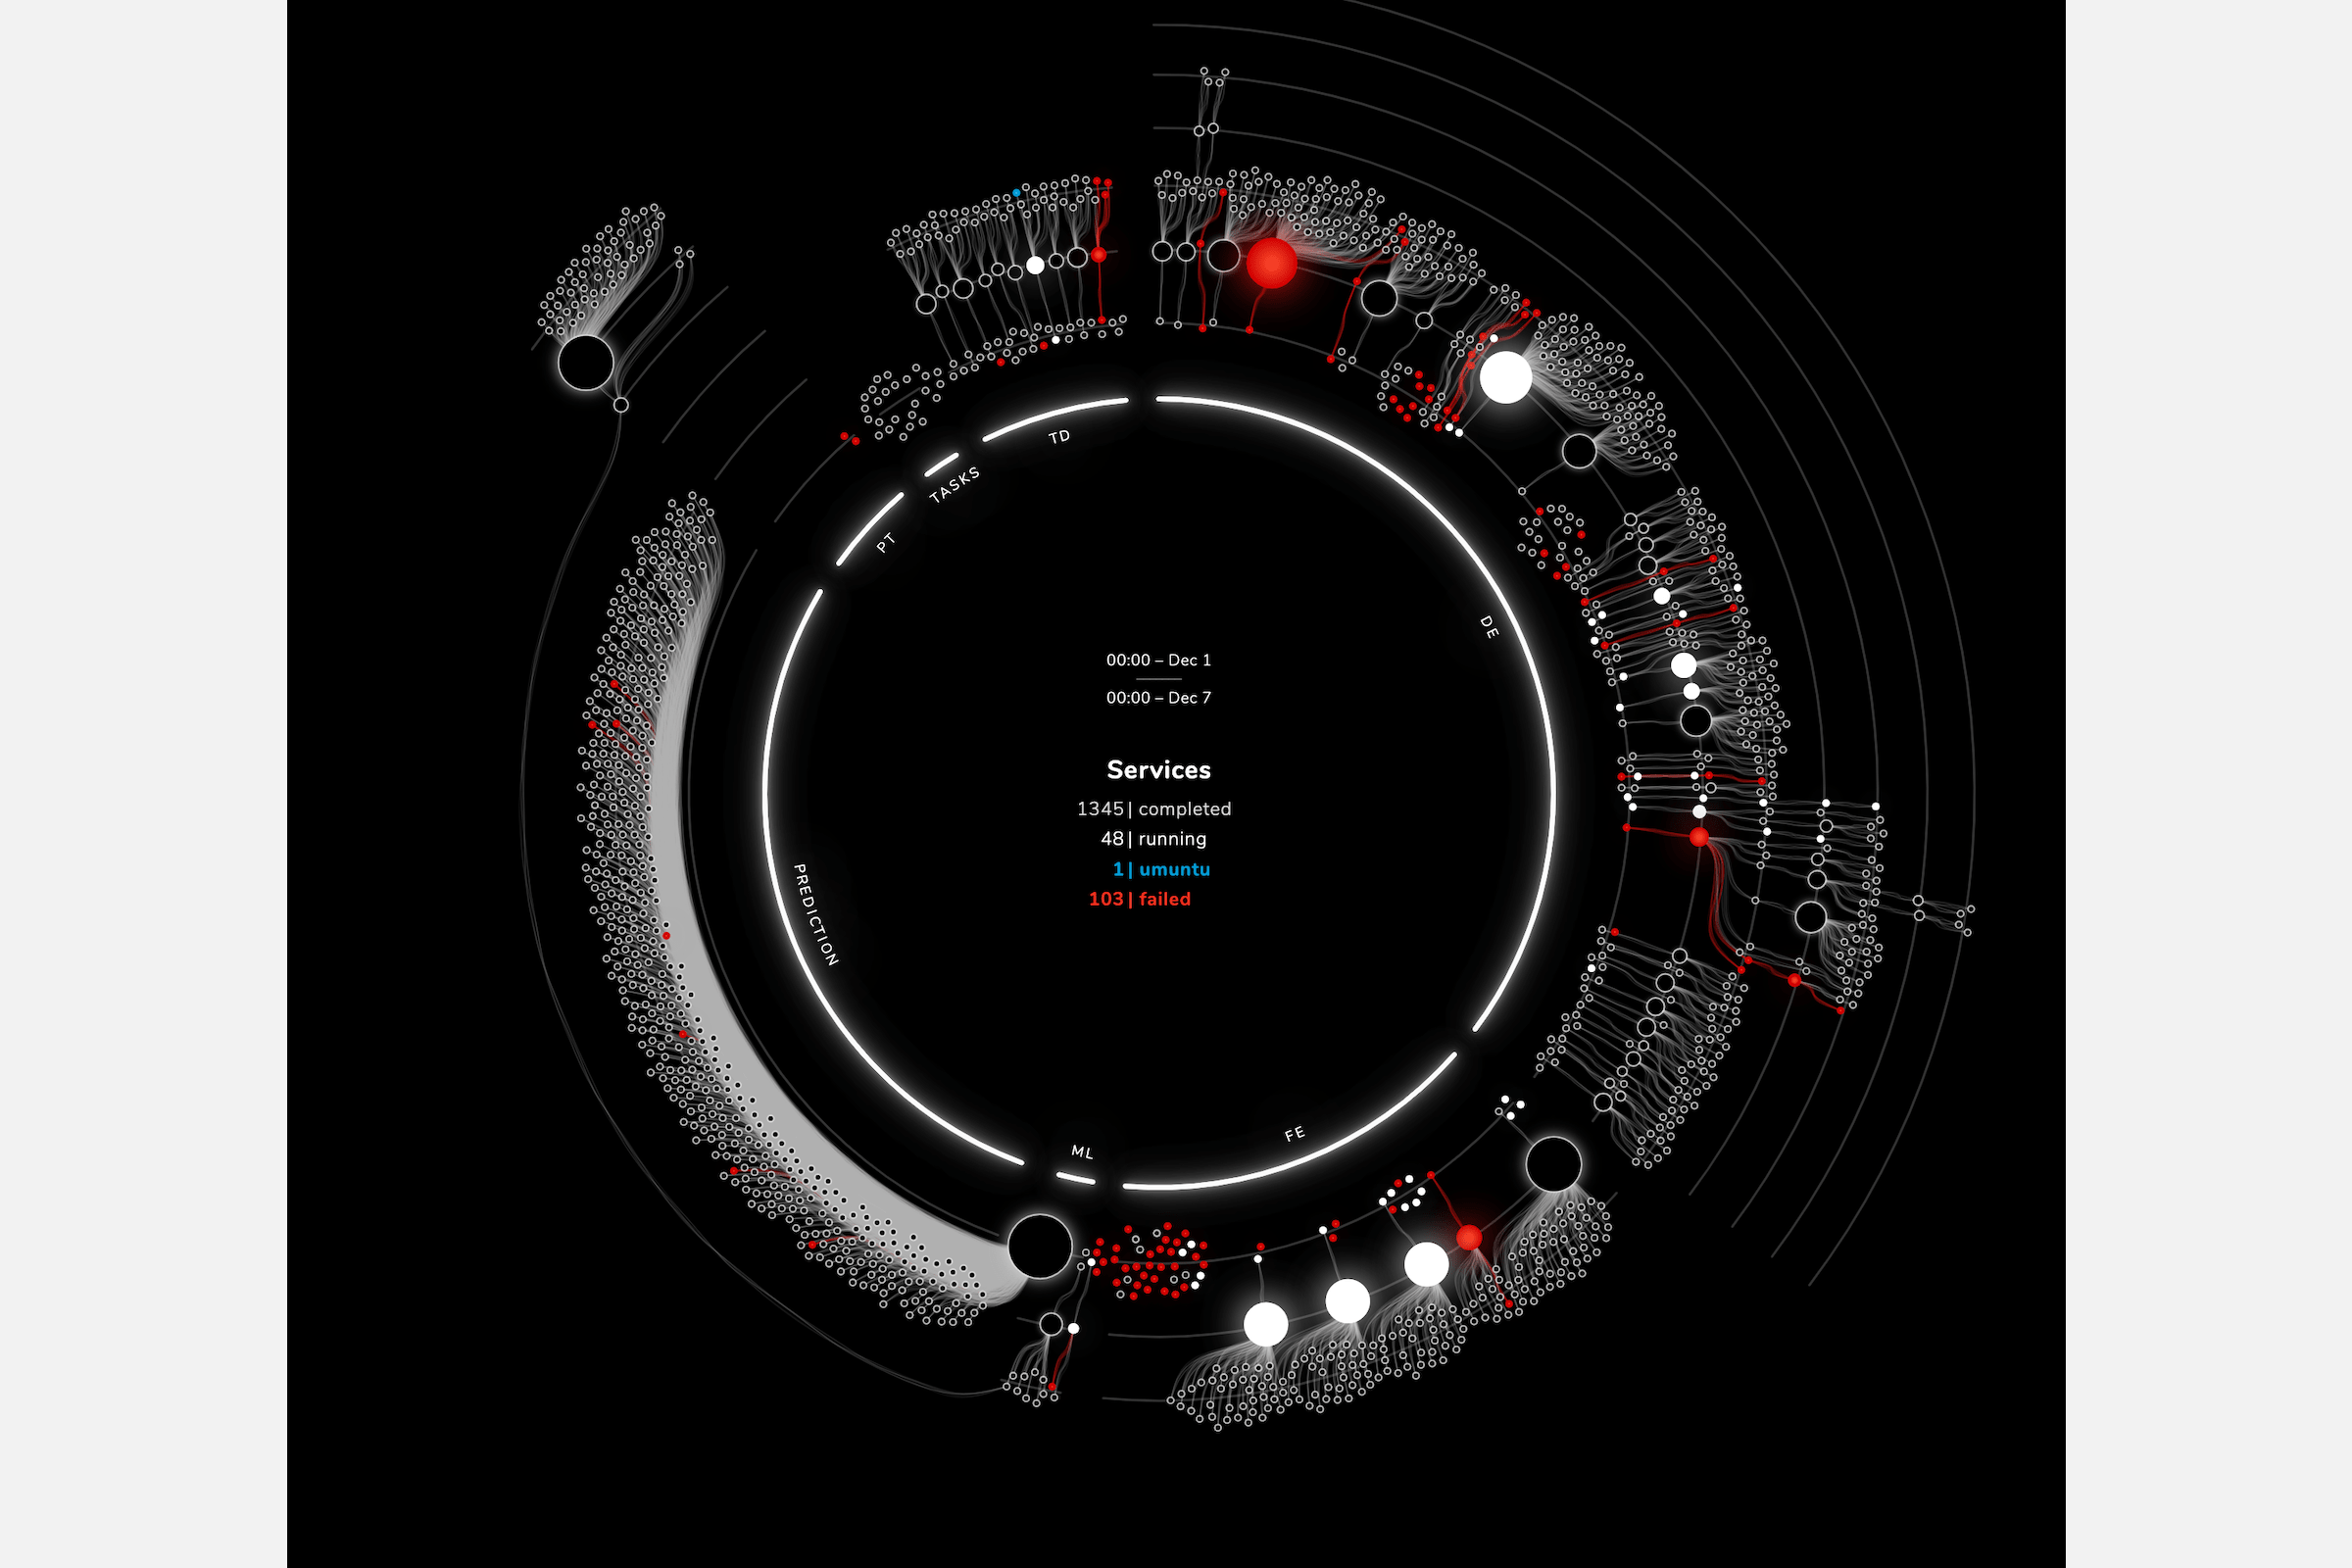 When many services have run, the visualization will jiggle them around the main radius to make it all fit without overlap